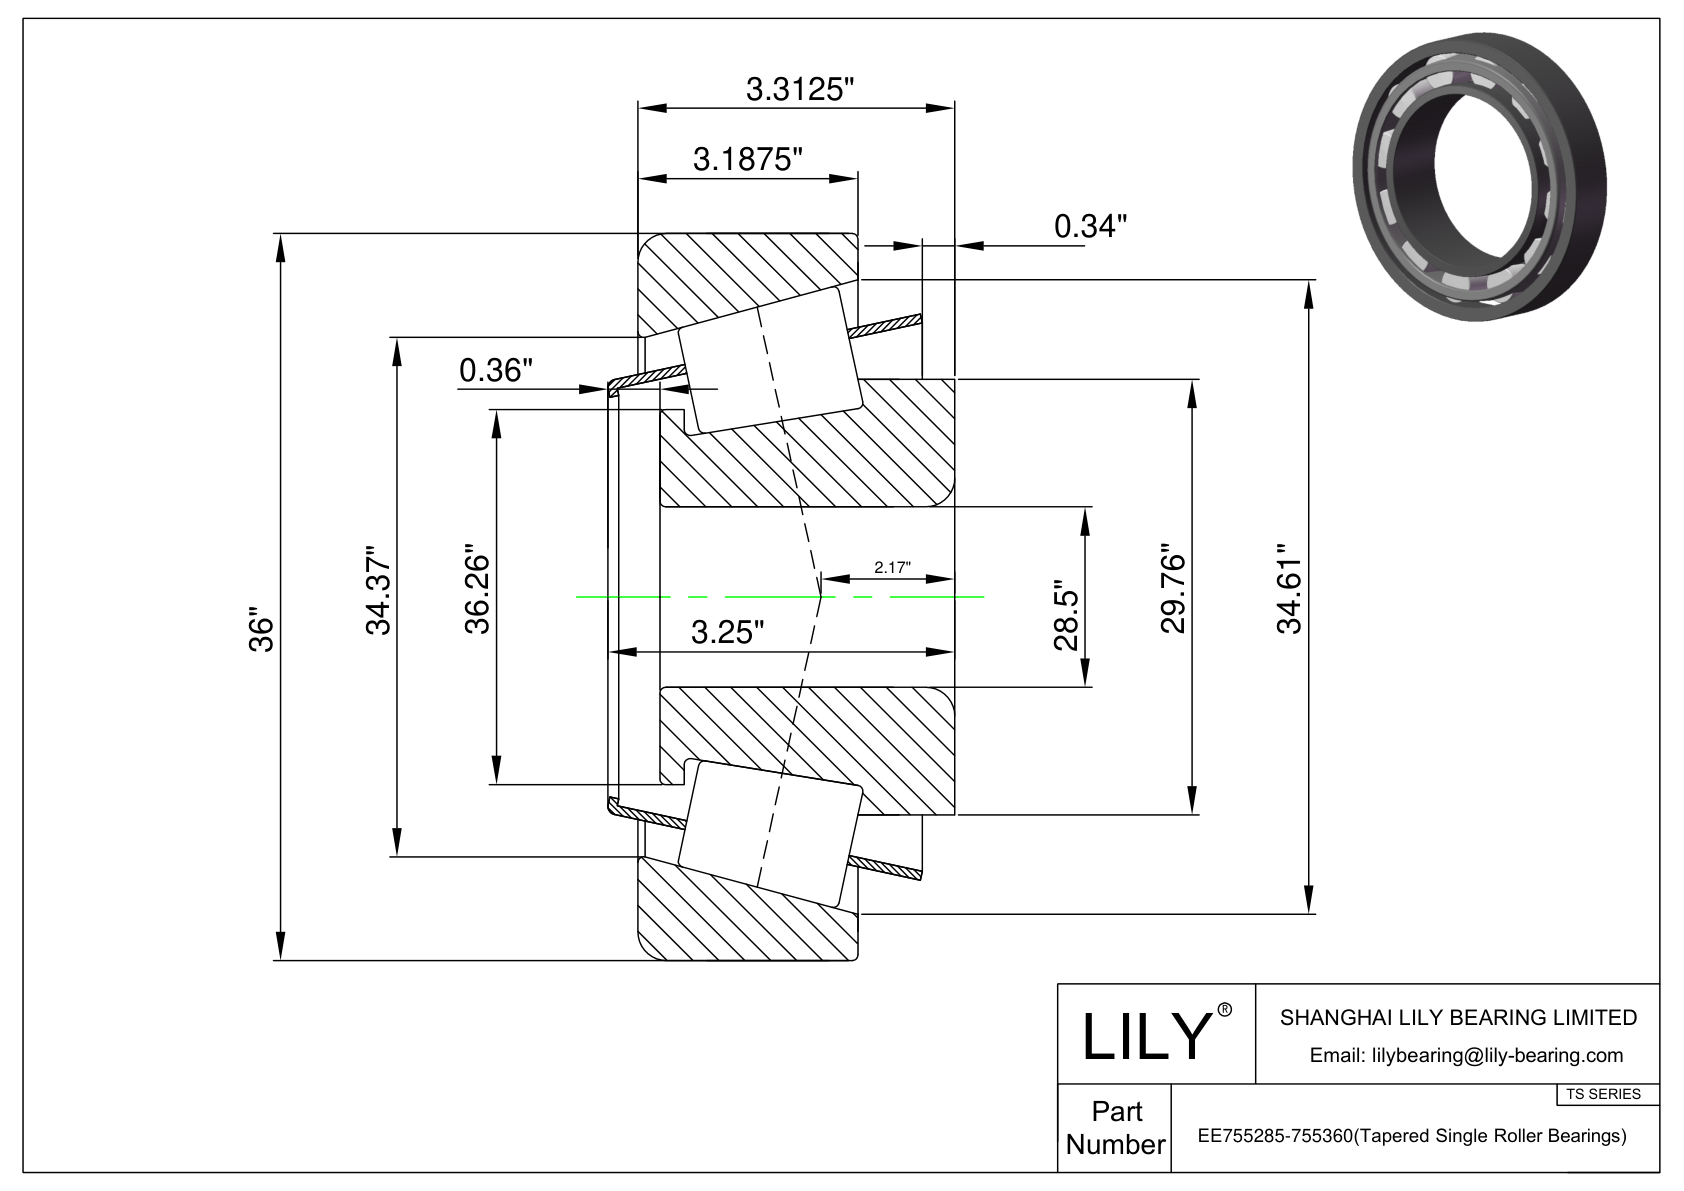 EE755285-755360 TS (Tapered Single Roller Bearings) (Imperial) cad drawing